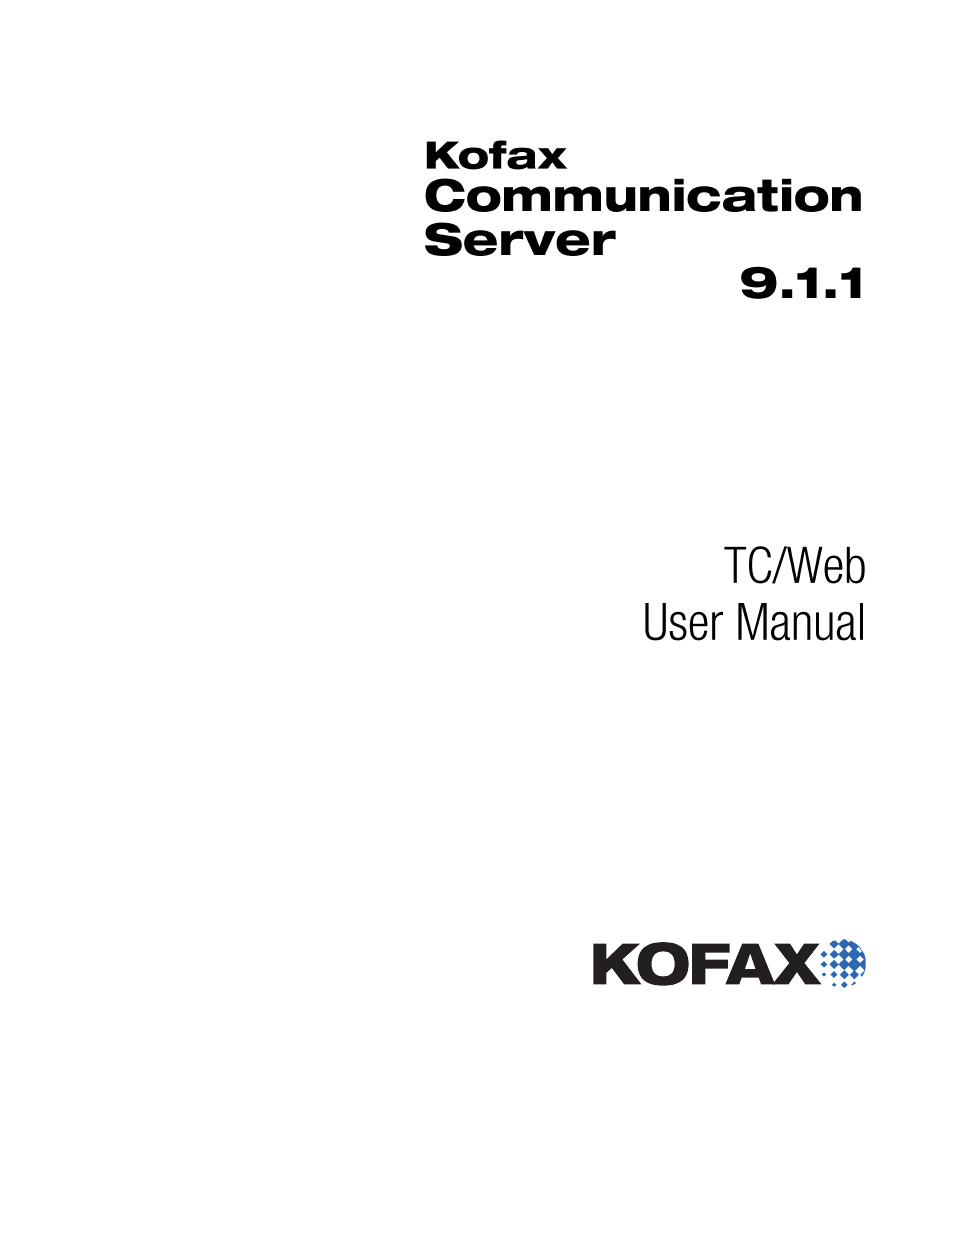 Kofax Communication Server 9.1.1 User Manual | 85 pages